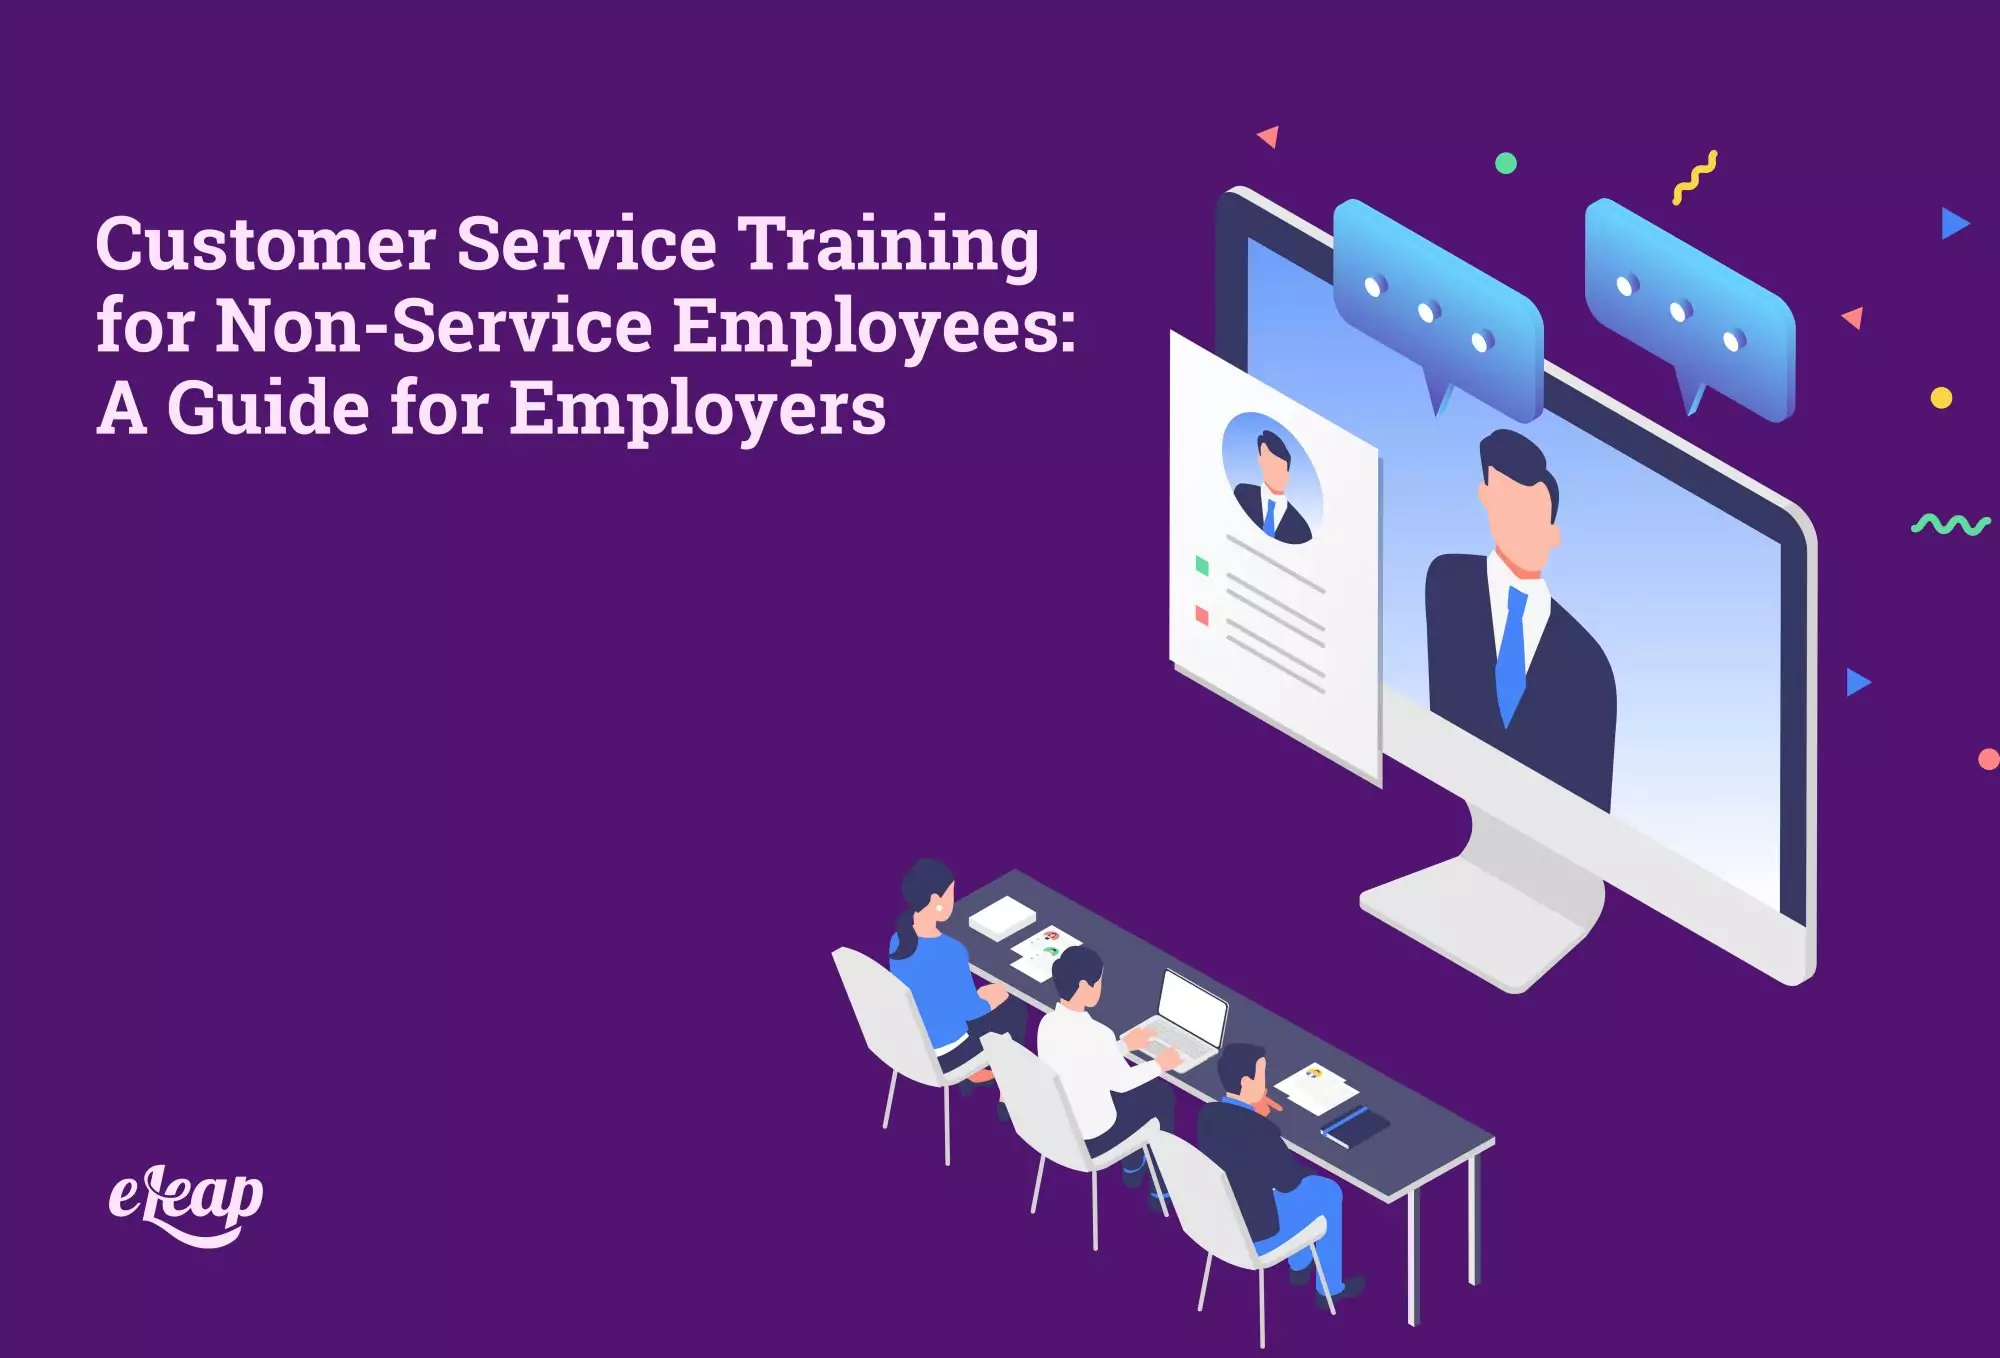 Customer Service Training for Non-Service Employees